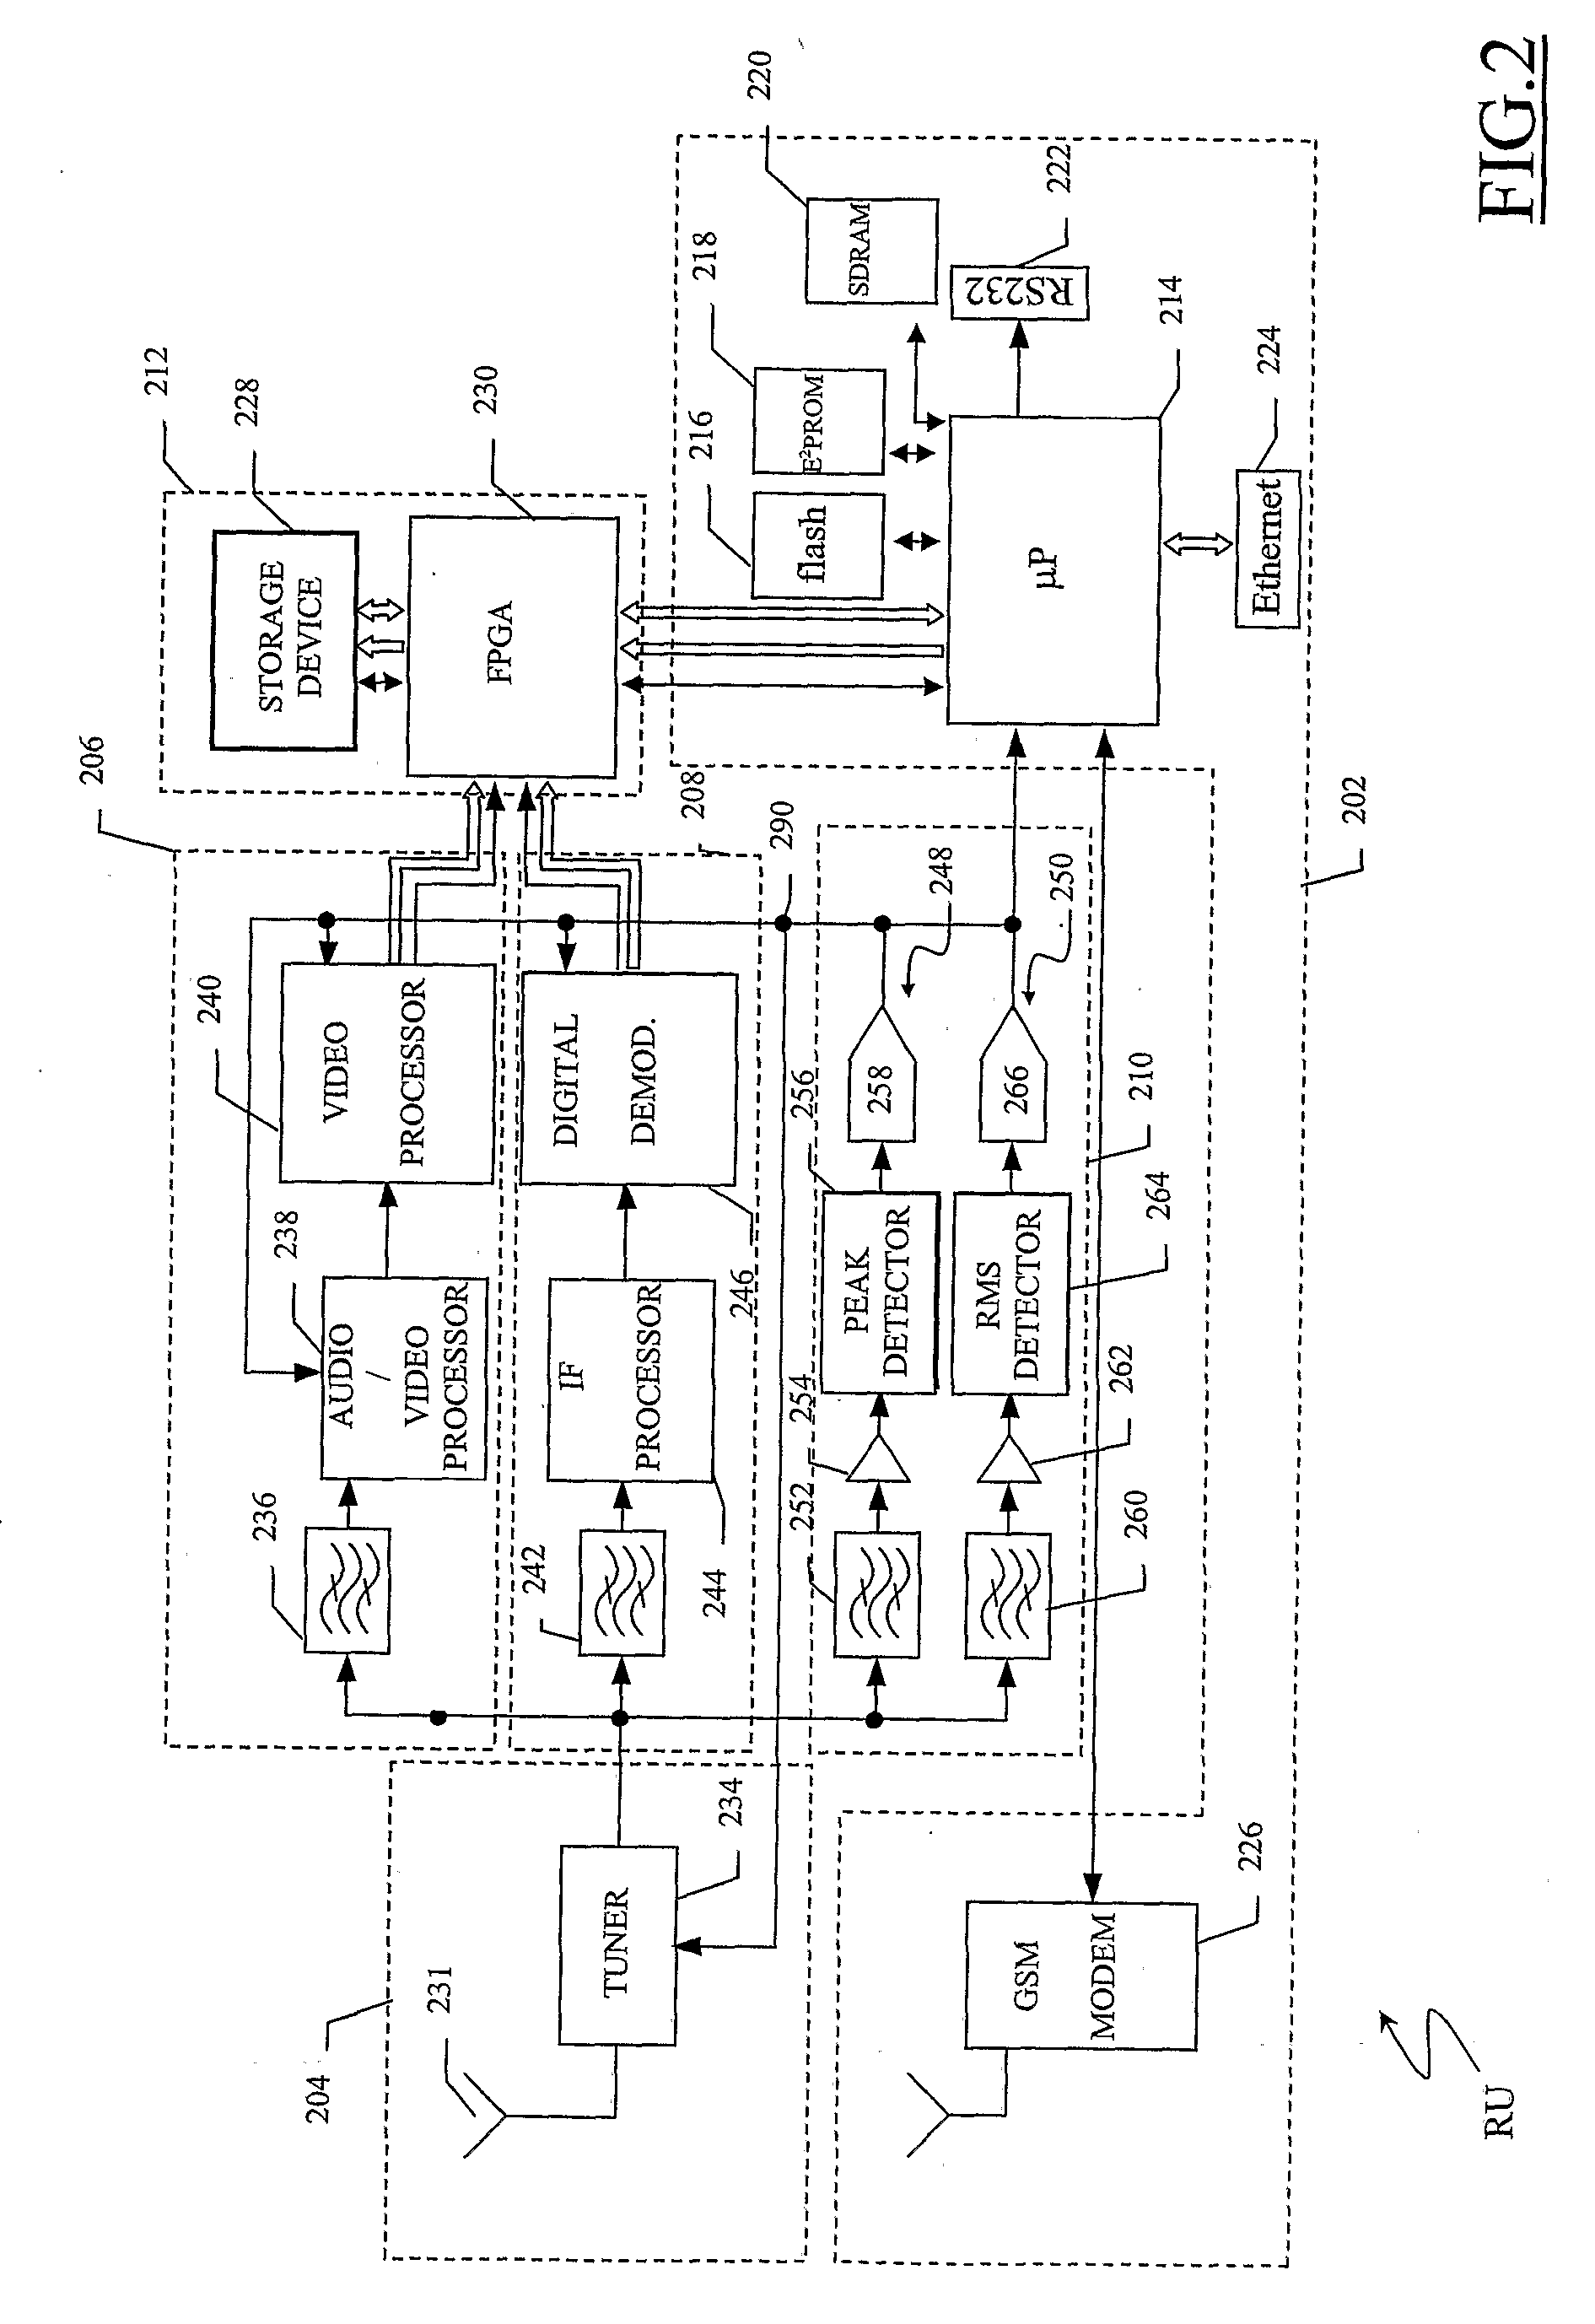 Monitoring System for Monitoring Coverage of Broadcast Transmissions